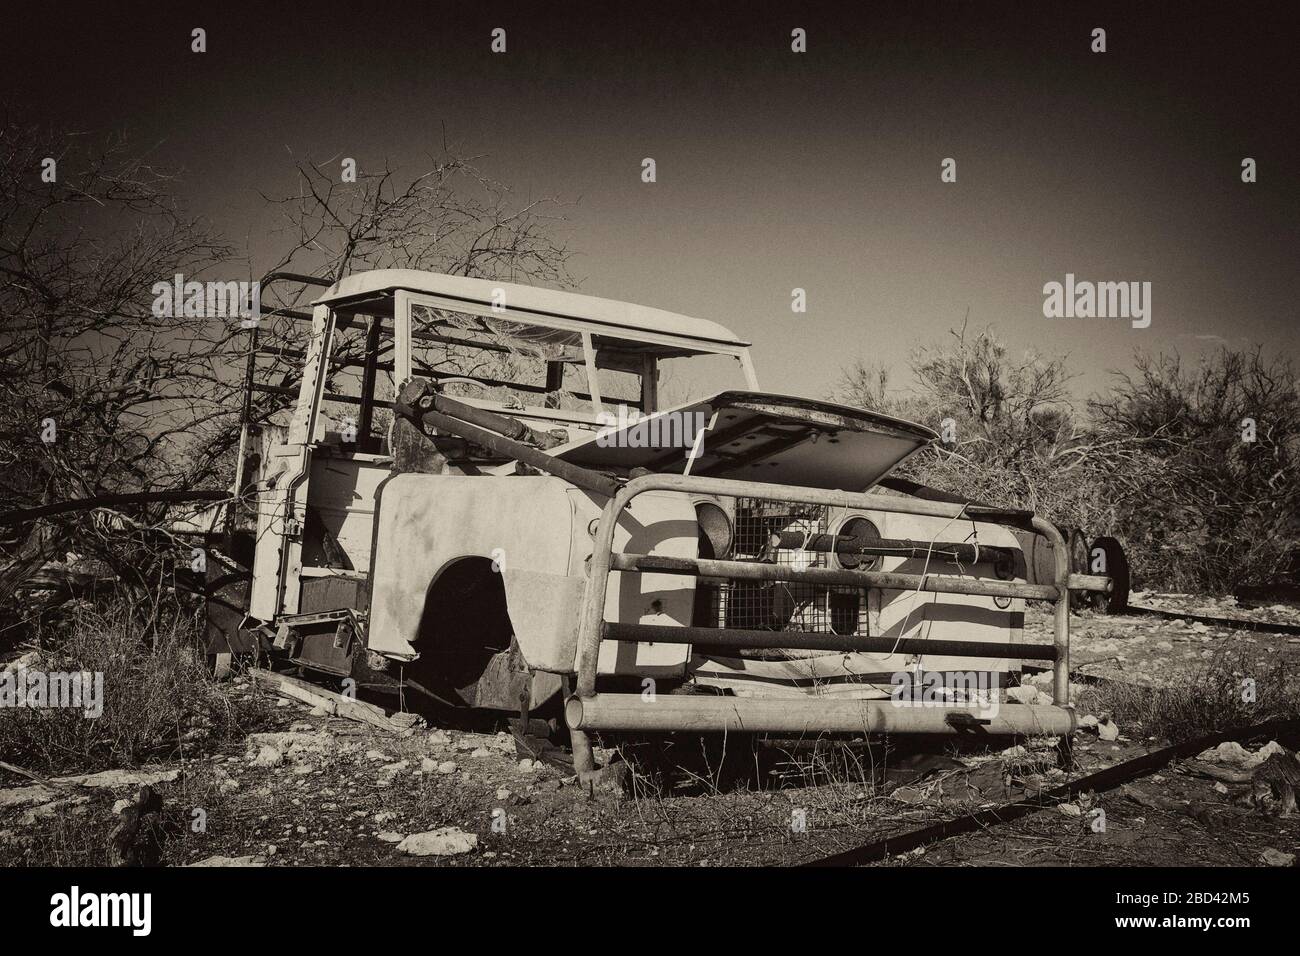 Remnants of a vintage land rover vehicle abandoned in the Australian Outback Stock Photo